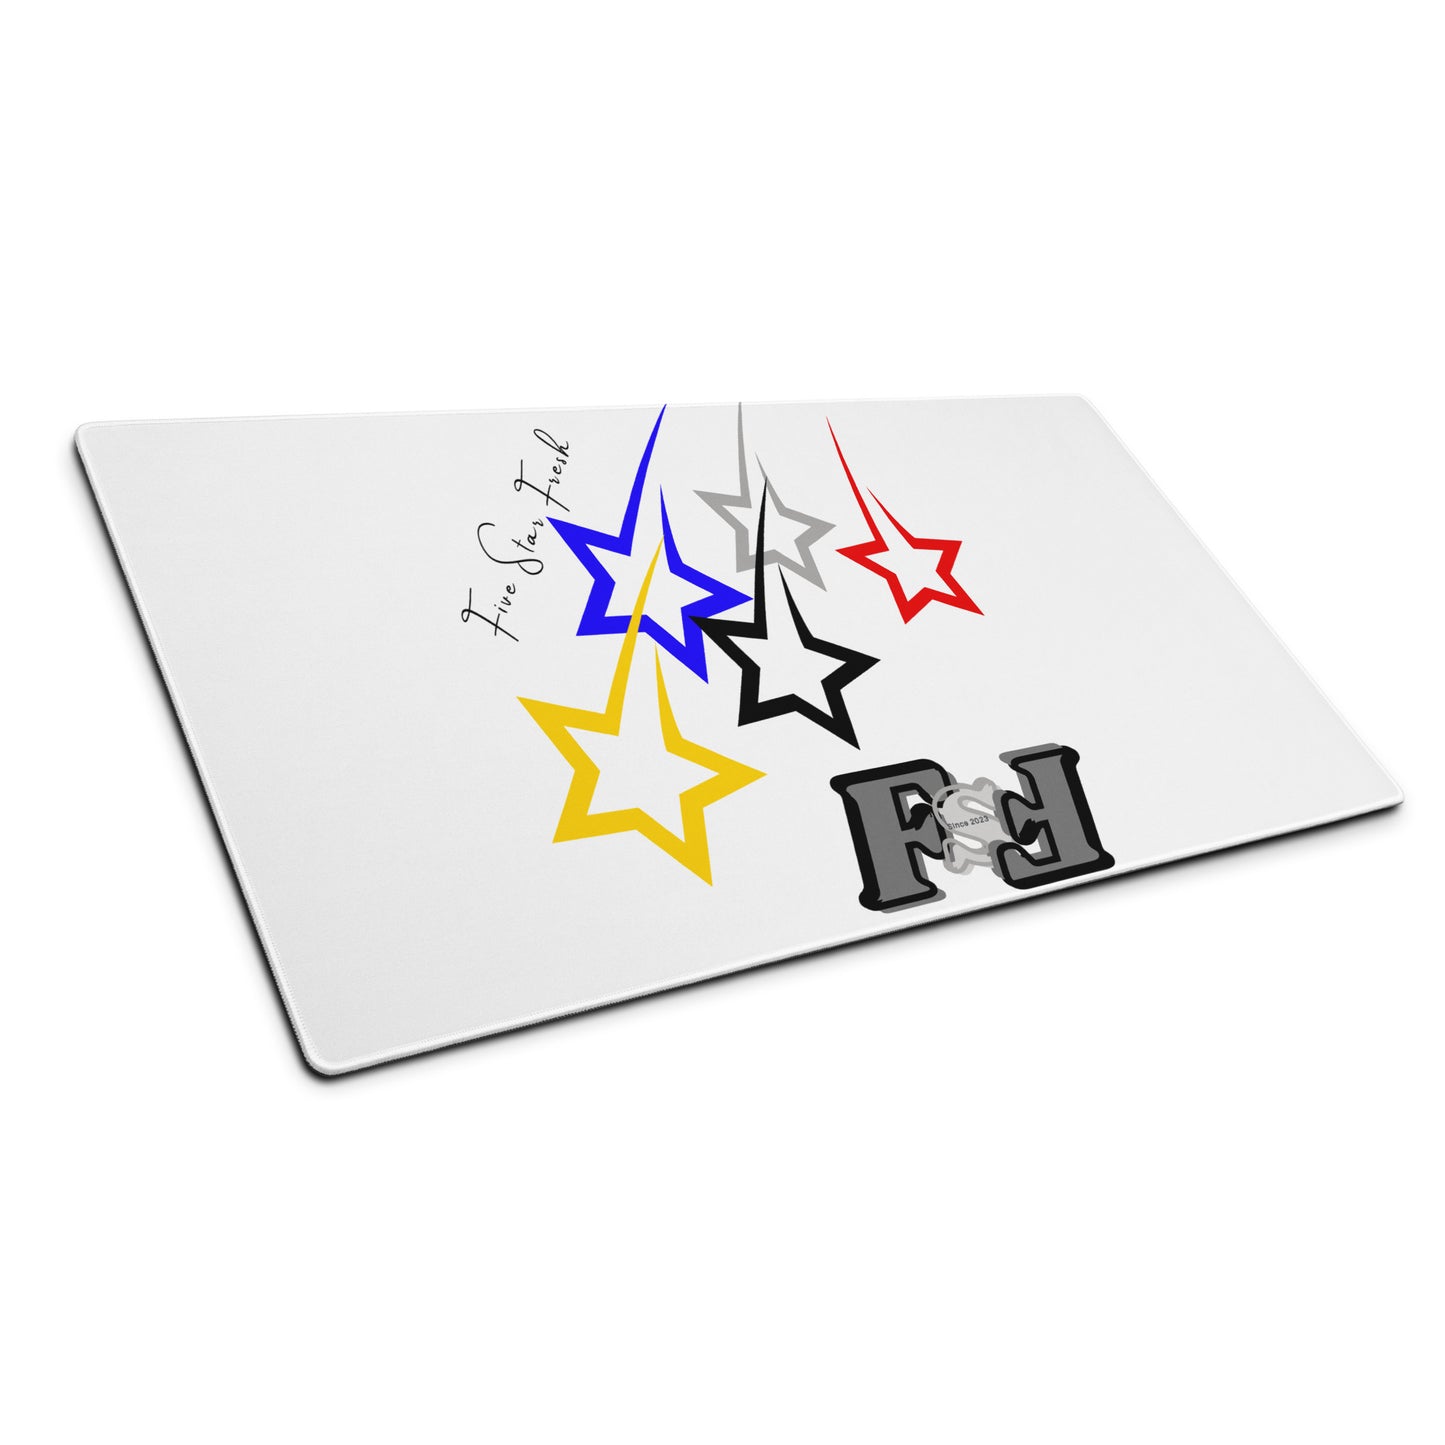 'Shooting Star' Bright - Five Star Fresh Gaming mouse pad